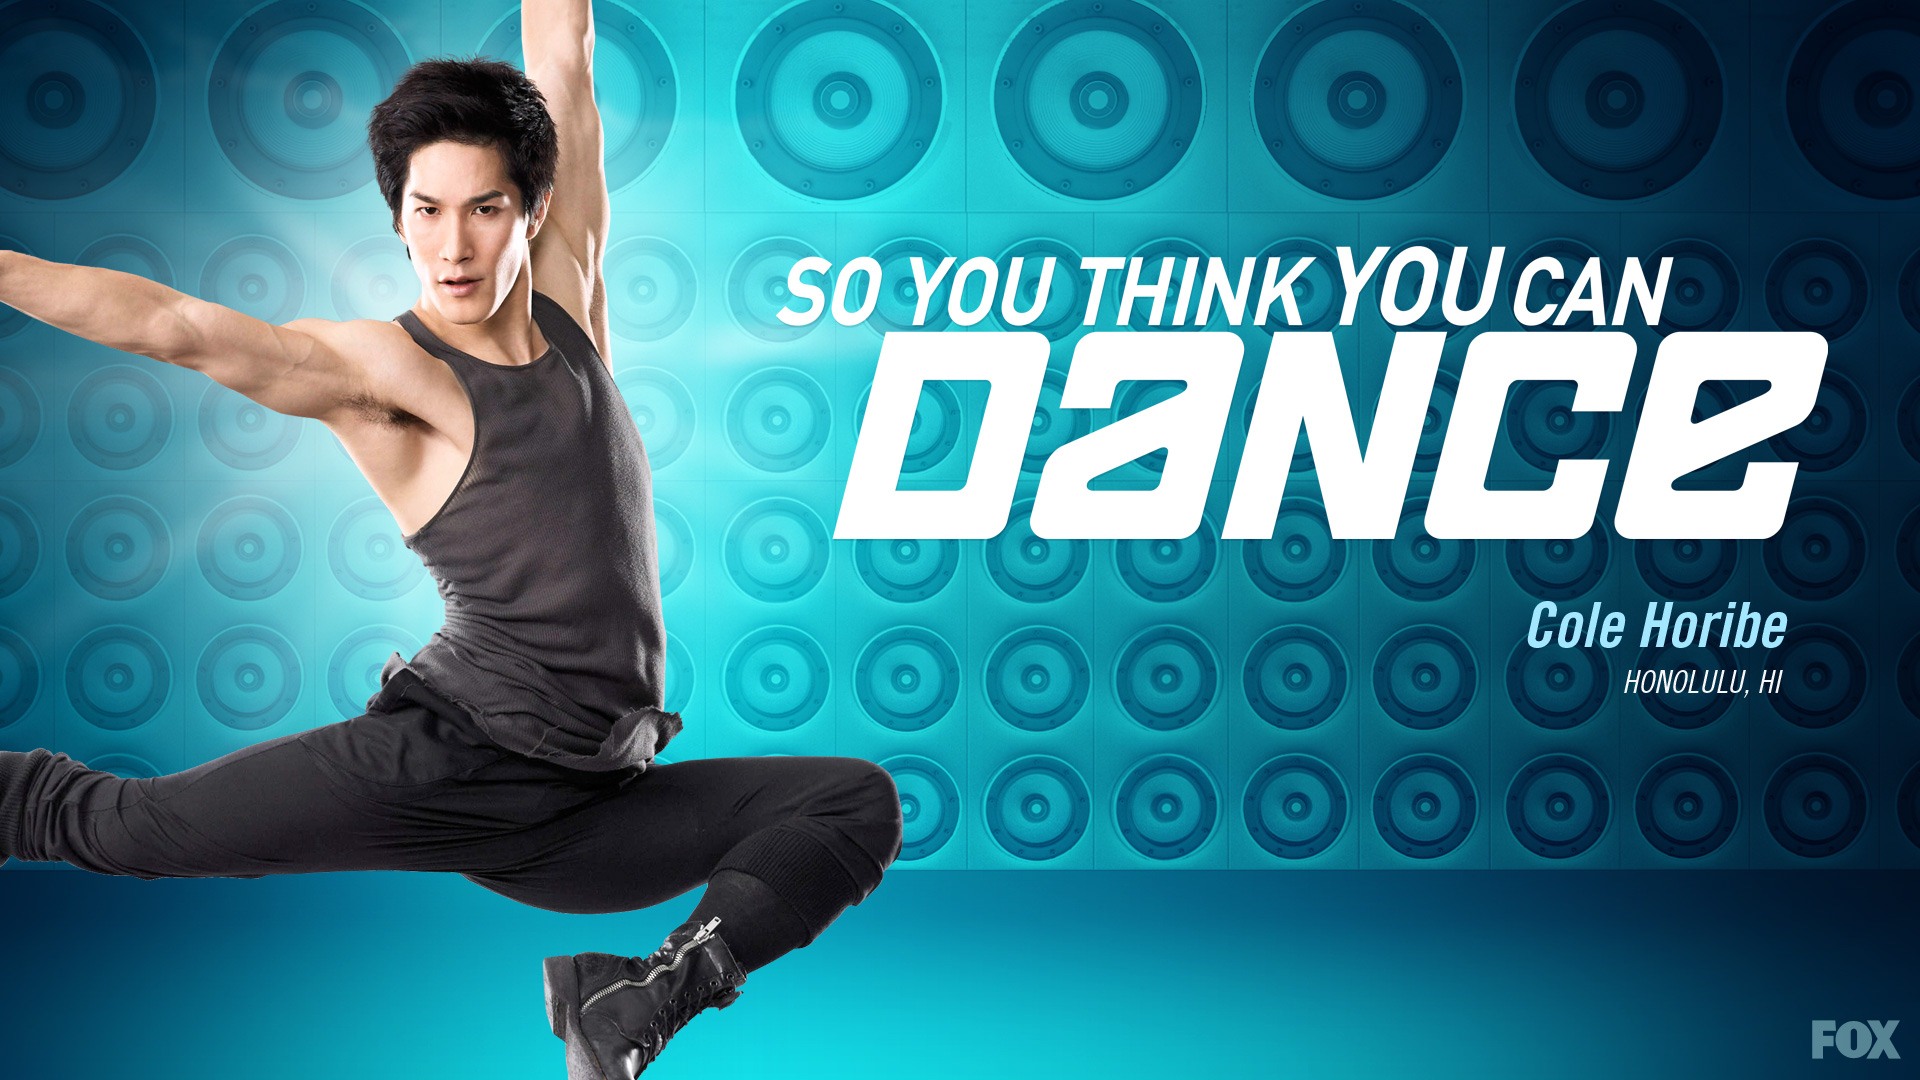 So You Think You Can Dance 舞林争霸 2012高清壁纸8 - 1920x1080